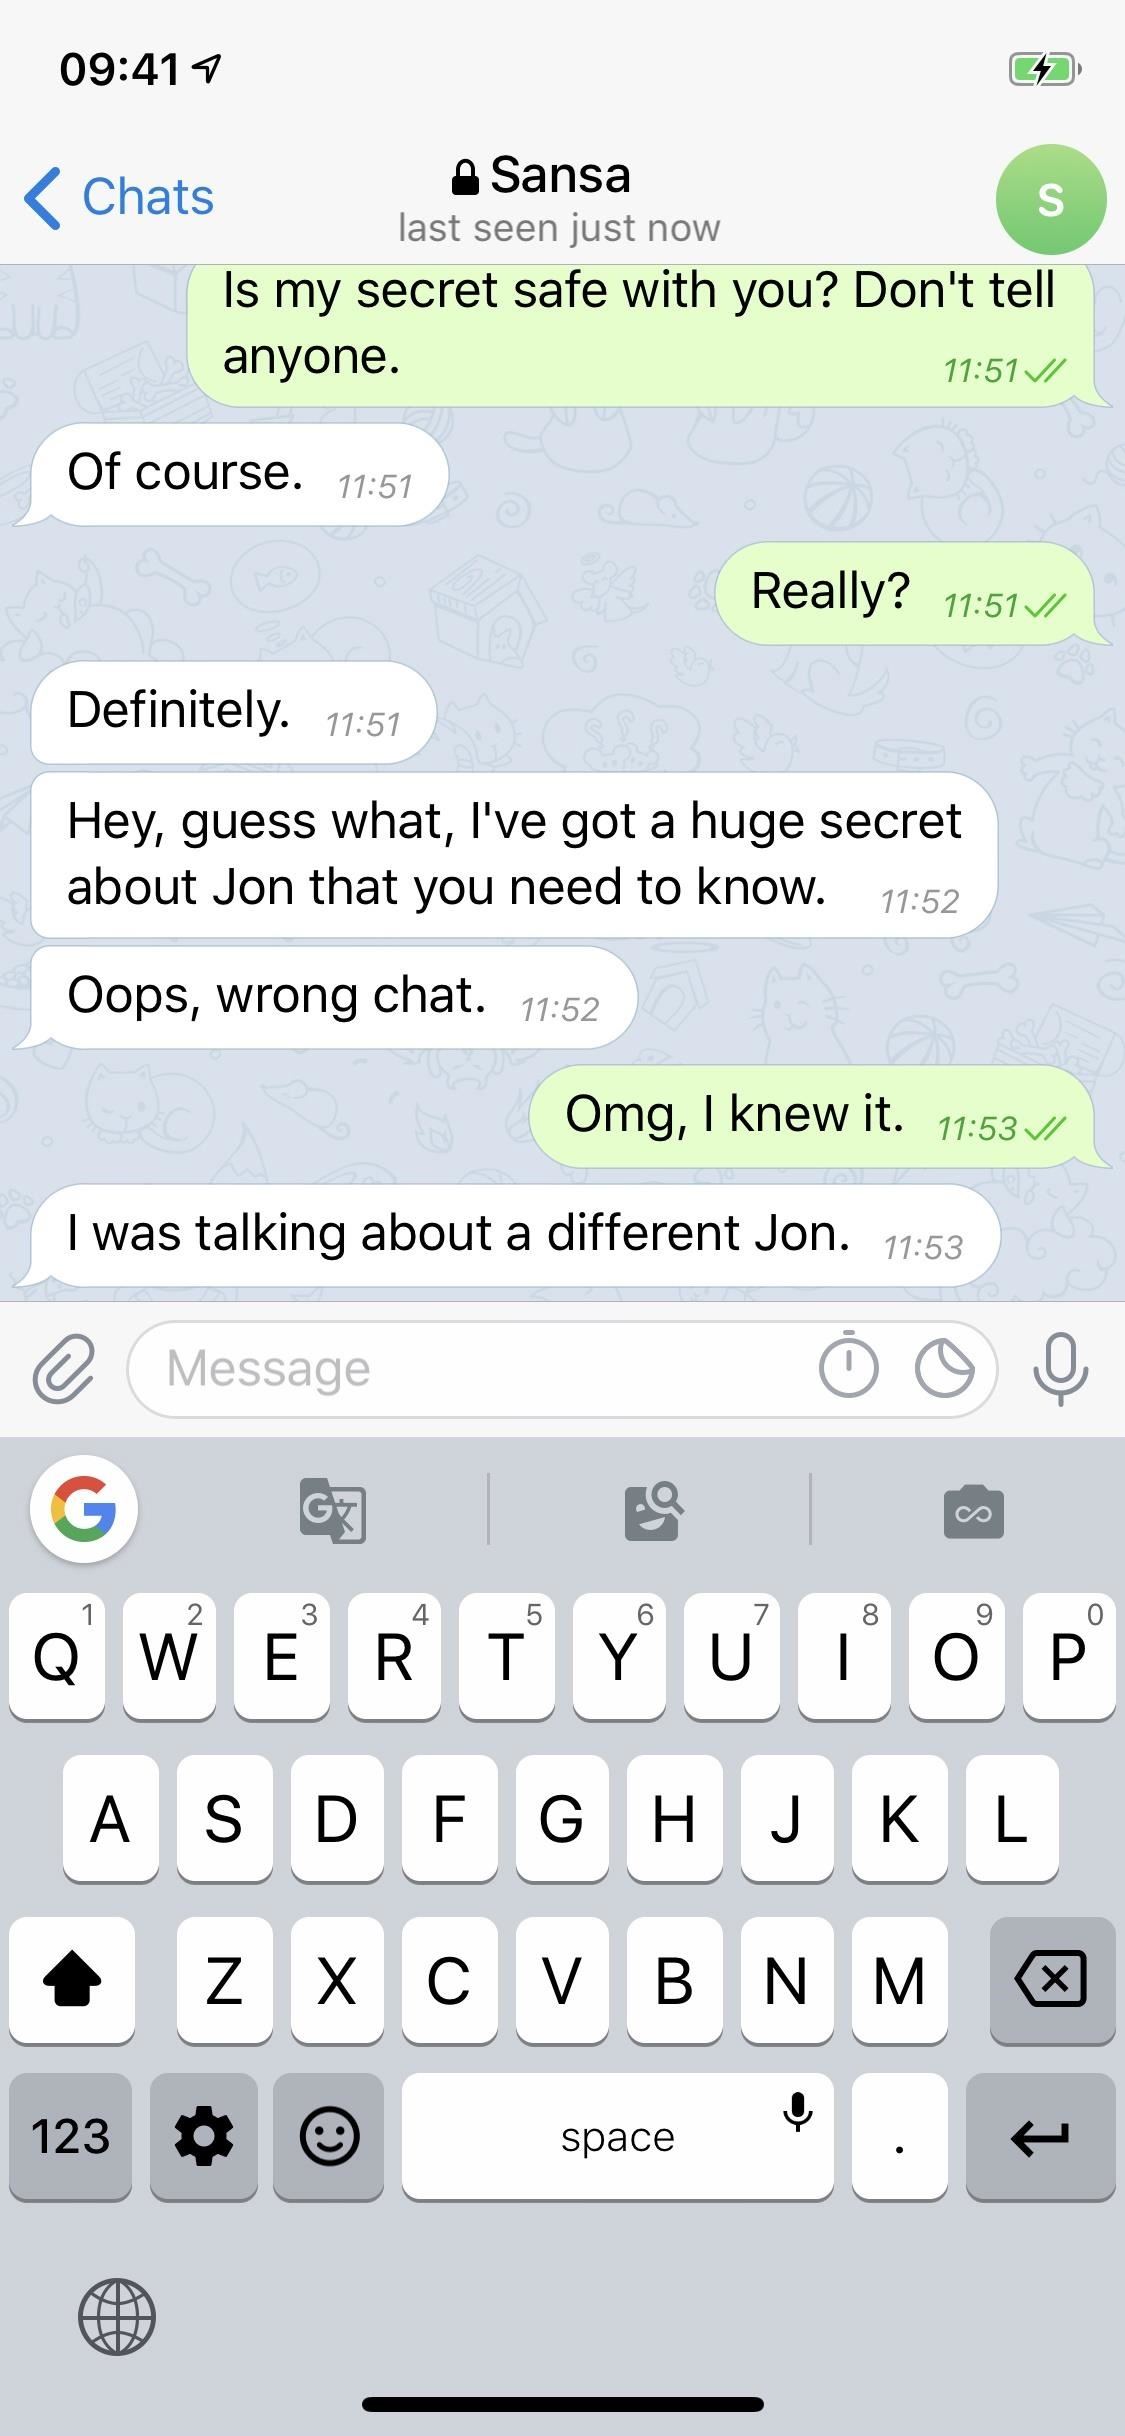 How to Enable End-to-End Encryption in Telegram Chats for Totally Private Conversations